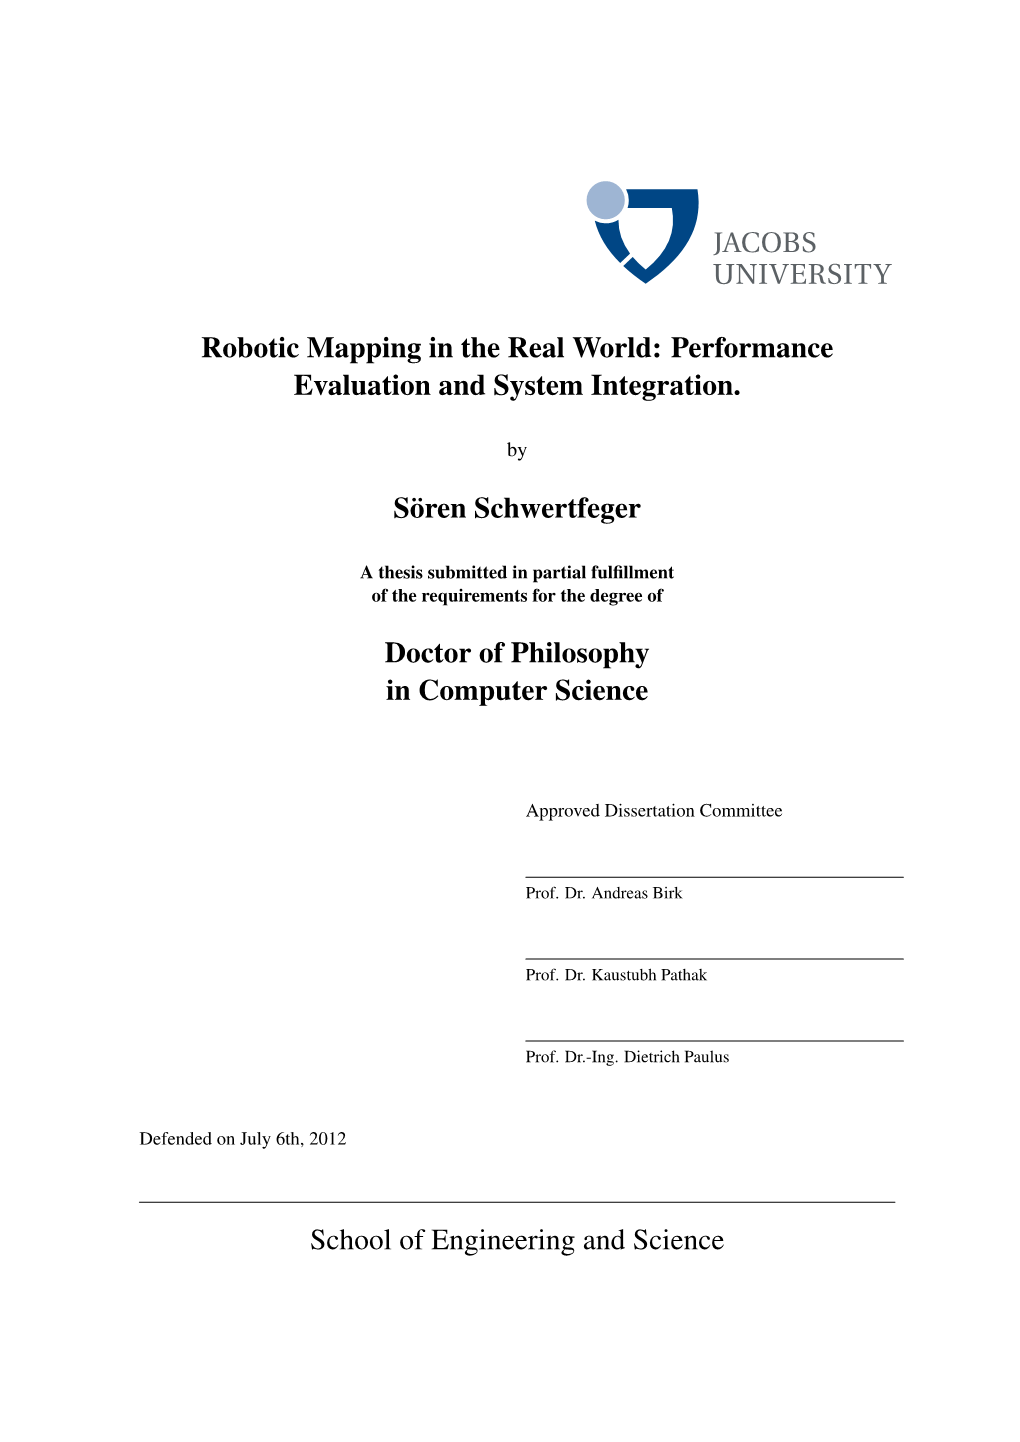 Robotic Mapping in the Real World: Performance Evaluation and System Integration